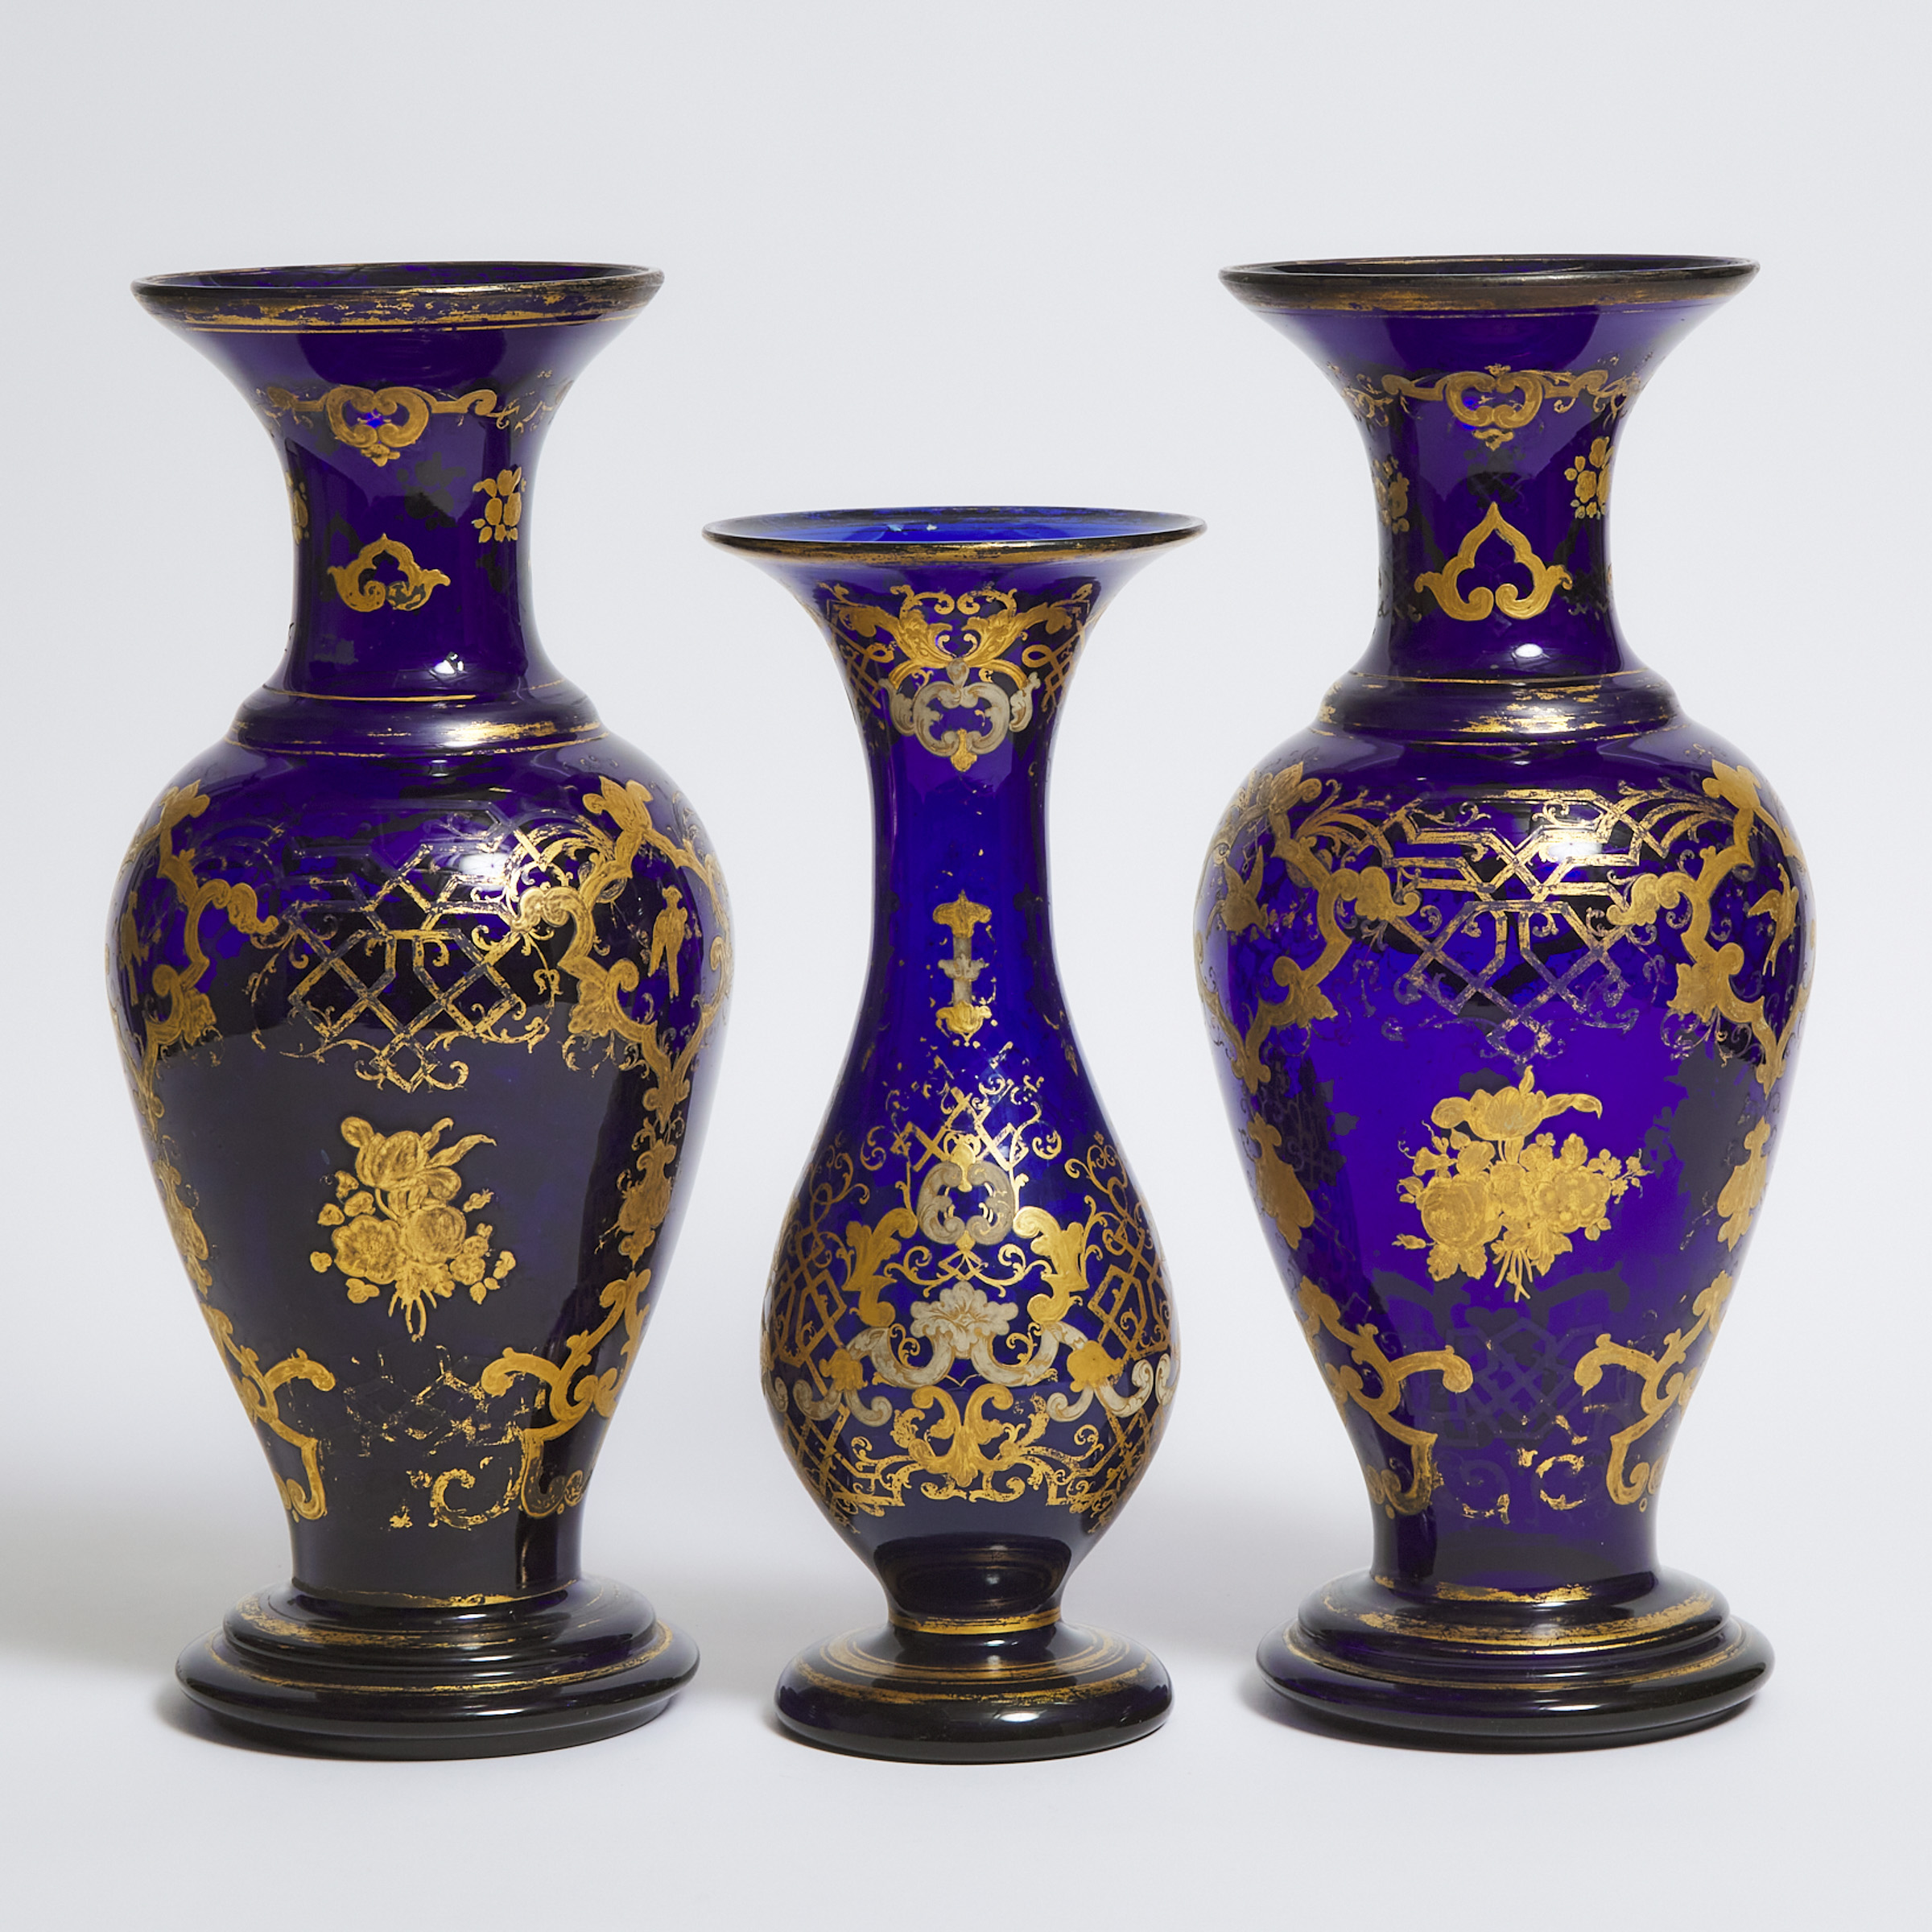 Garniture of Three Continental Gilt Decorated Blue Glass Vases, 19th century